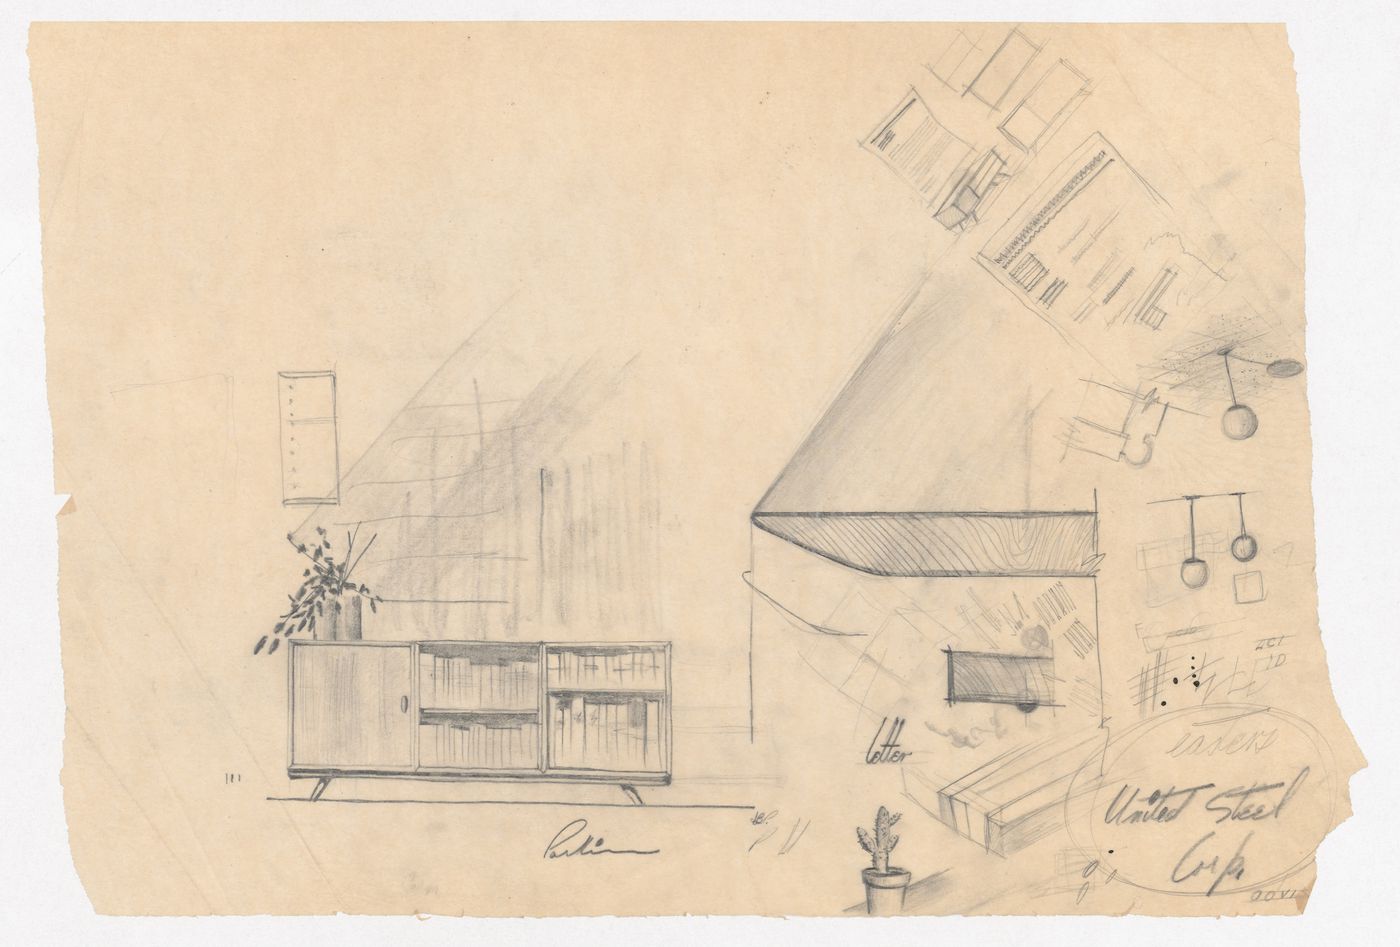 Furniture sketches for Residence of Mr. & Mrs. John C. Parkin, North York, Ontario